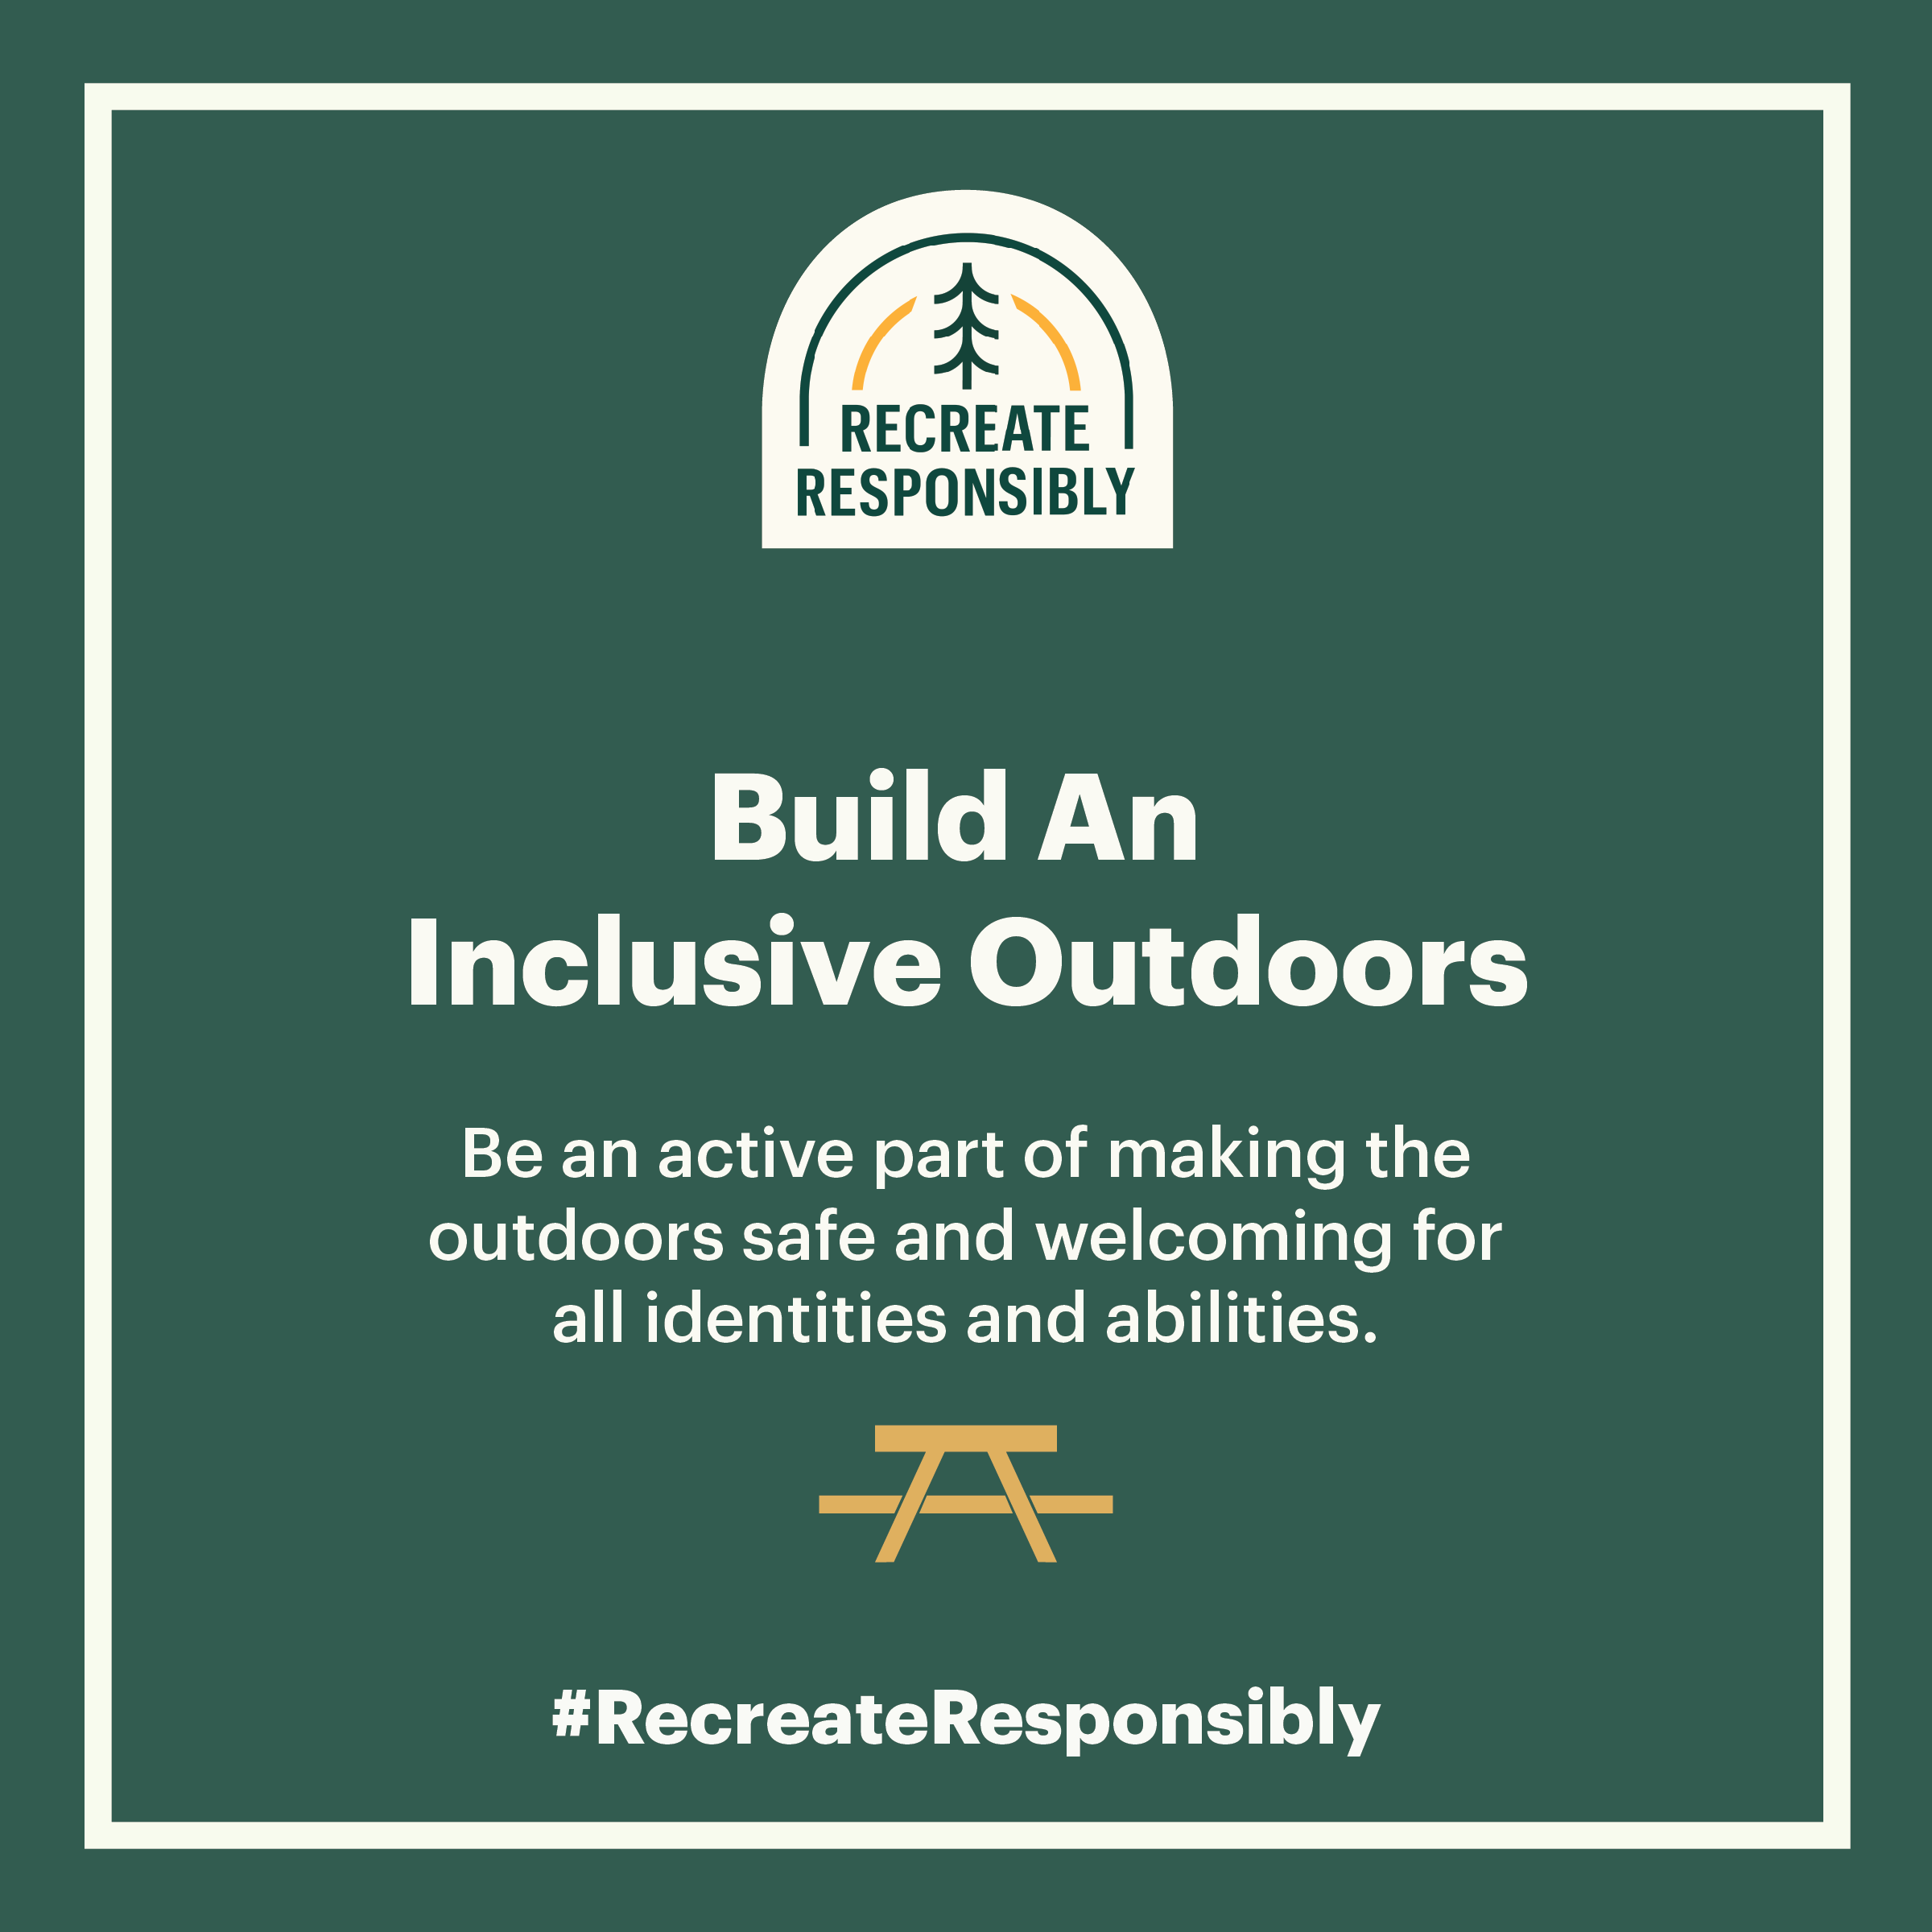 Image with the heading "Build An Inclusive Outdoors" followed by the text, "Be an active part of making the outdoors safe and welcoming for all identities and abilities." The image links to the Recreate Responsibly website.